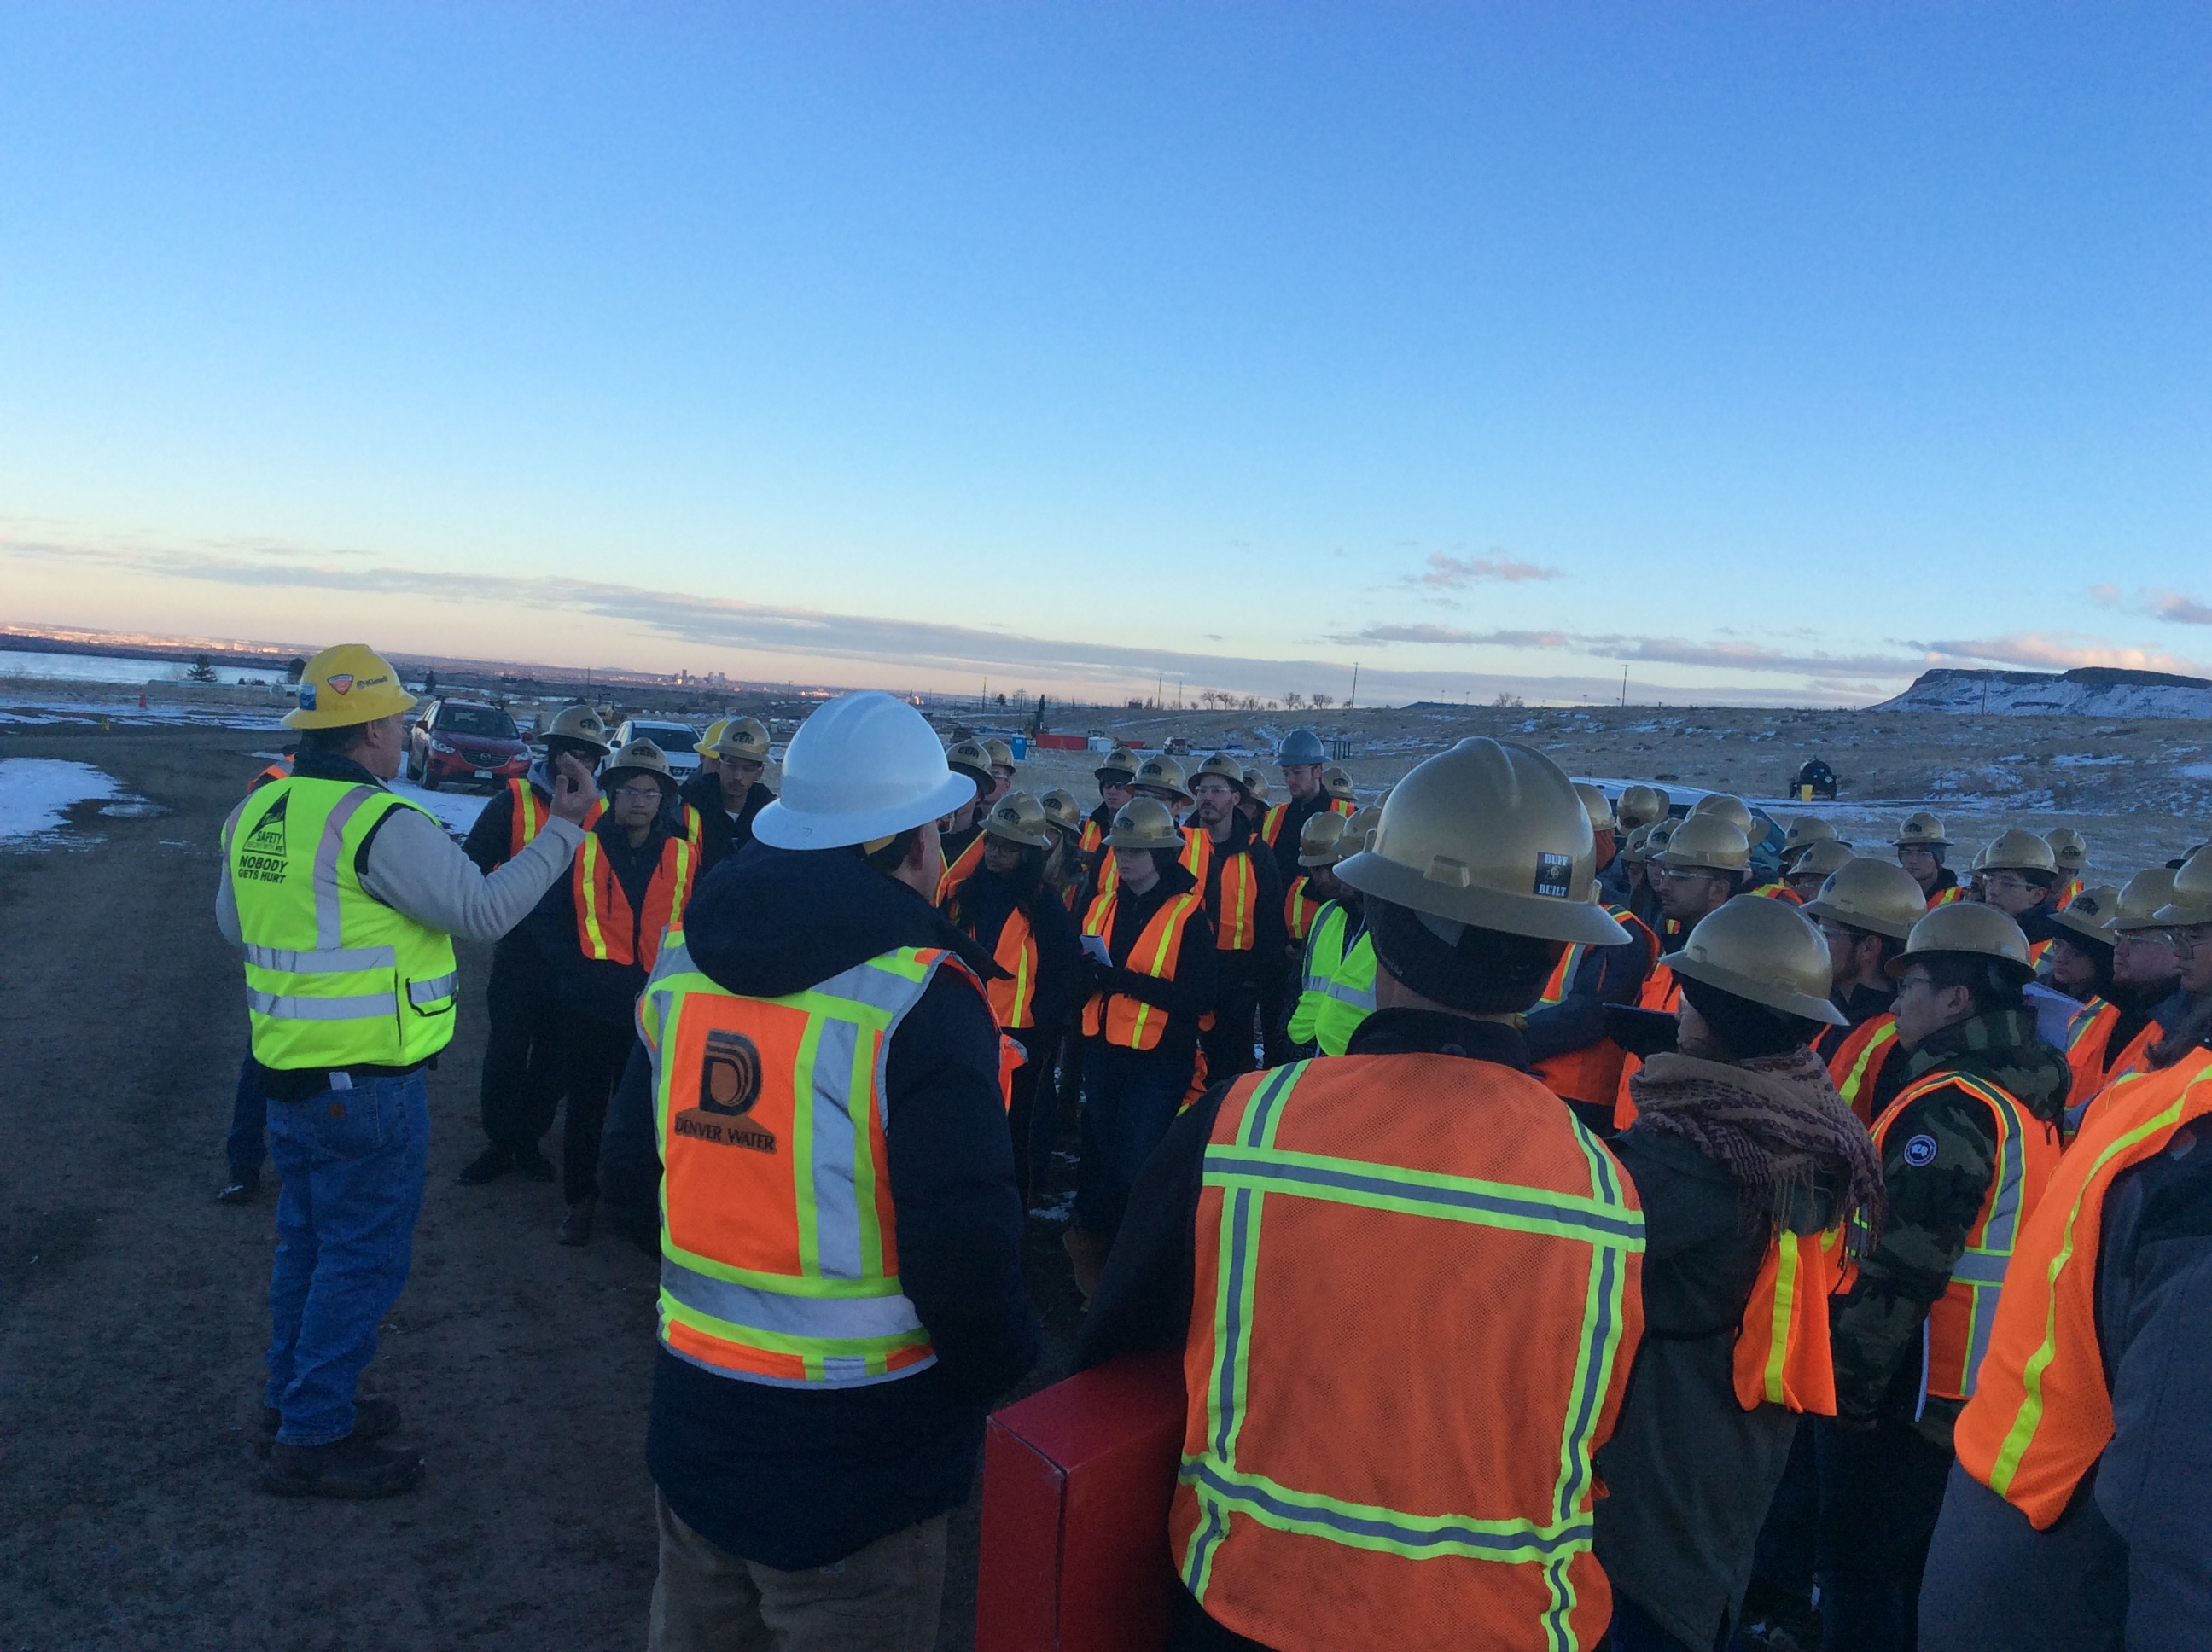 A crowd of students, all wearing hardhats and safety vests, listens to a man in a hard hat talk.